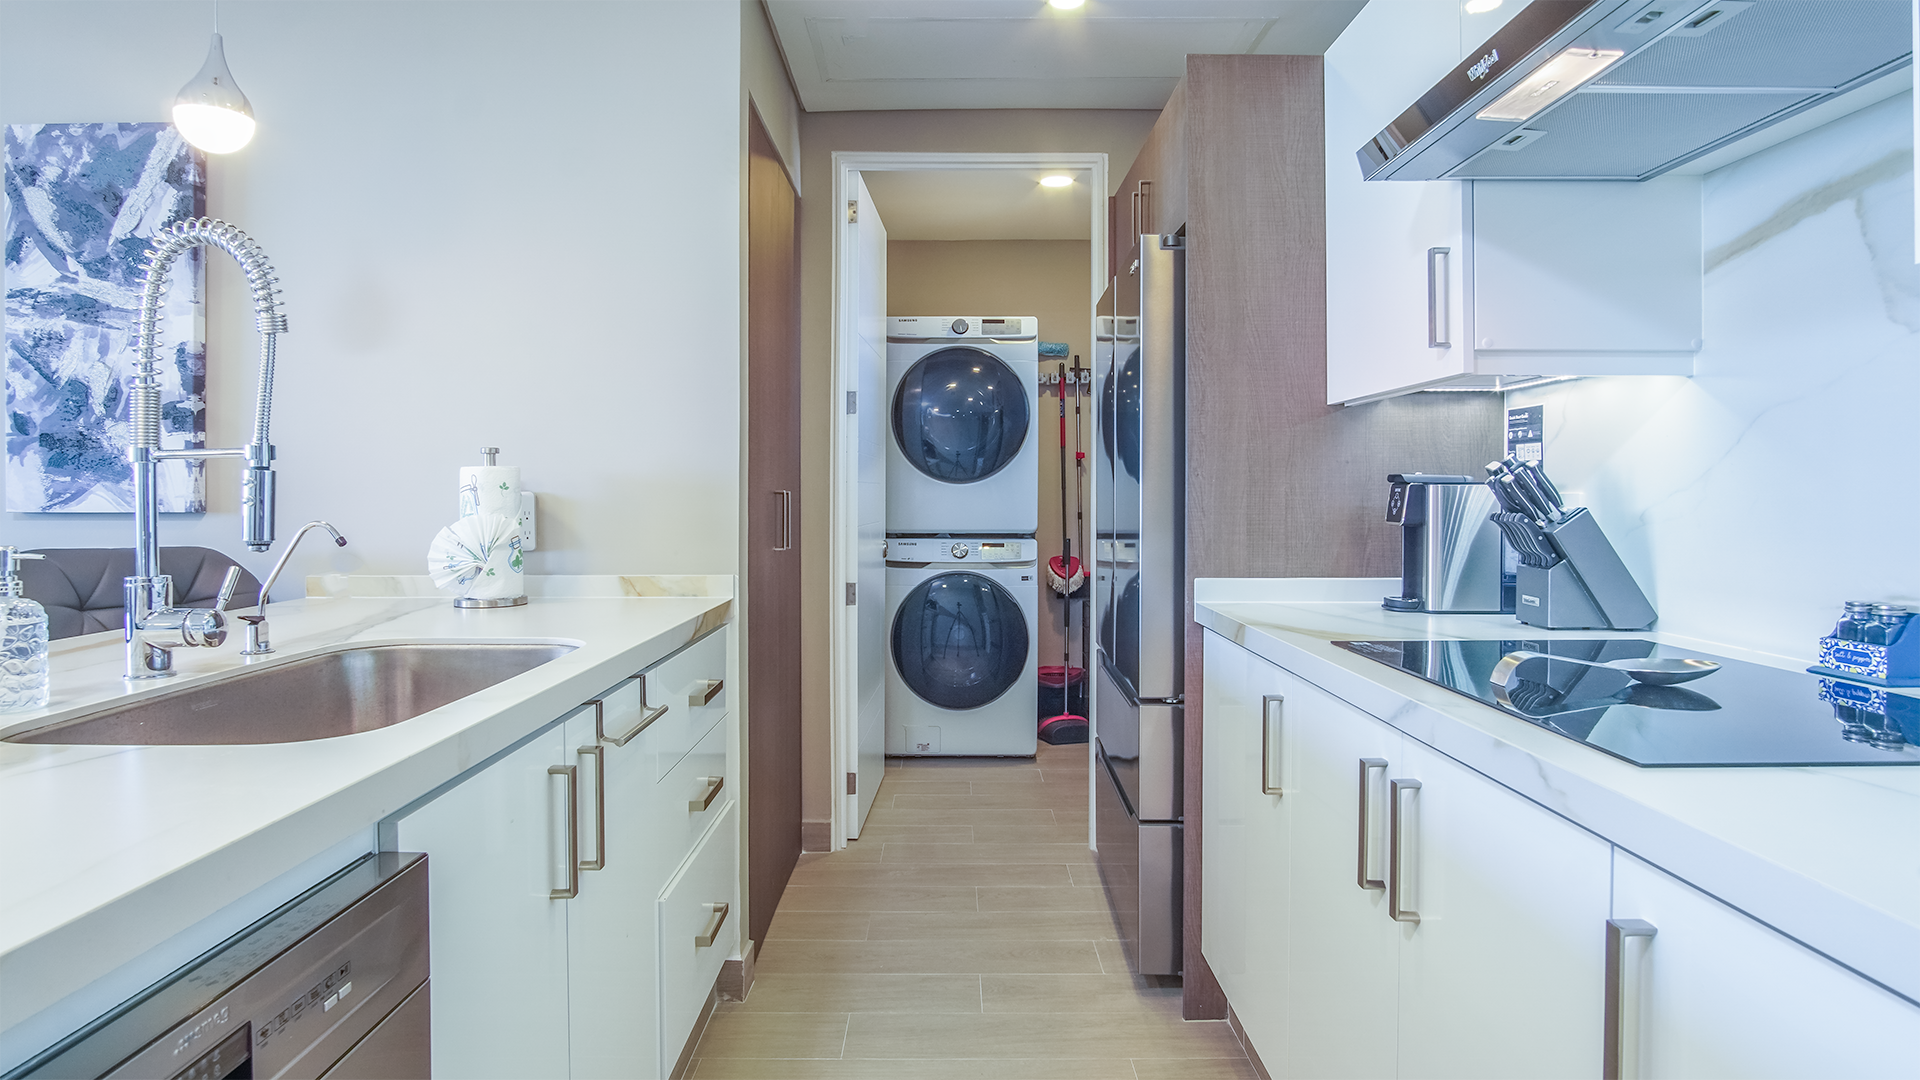 Walk through the kitchen to access the washer and dryer.